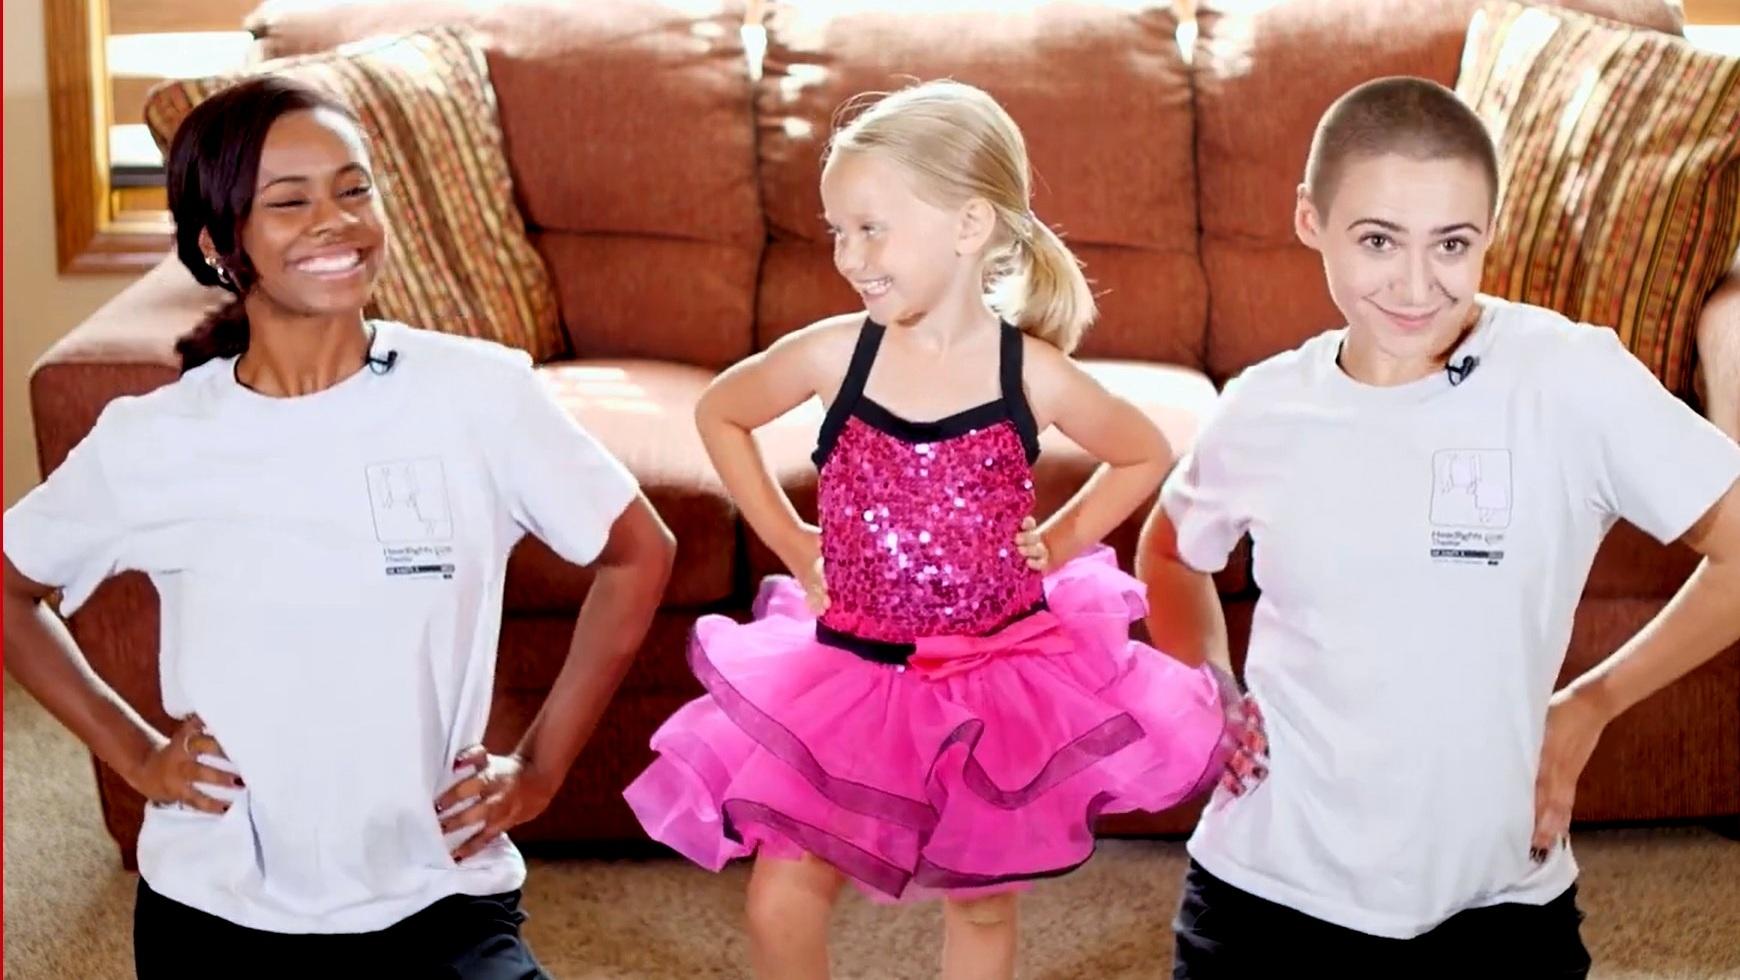 Two female dancers kneeling on either side of a little girl wearing a pink dance outfit with sequins. They are in a living room in front of a couch.